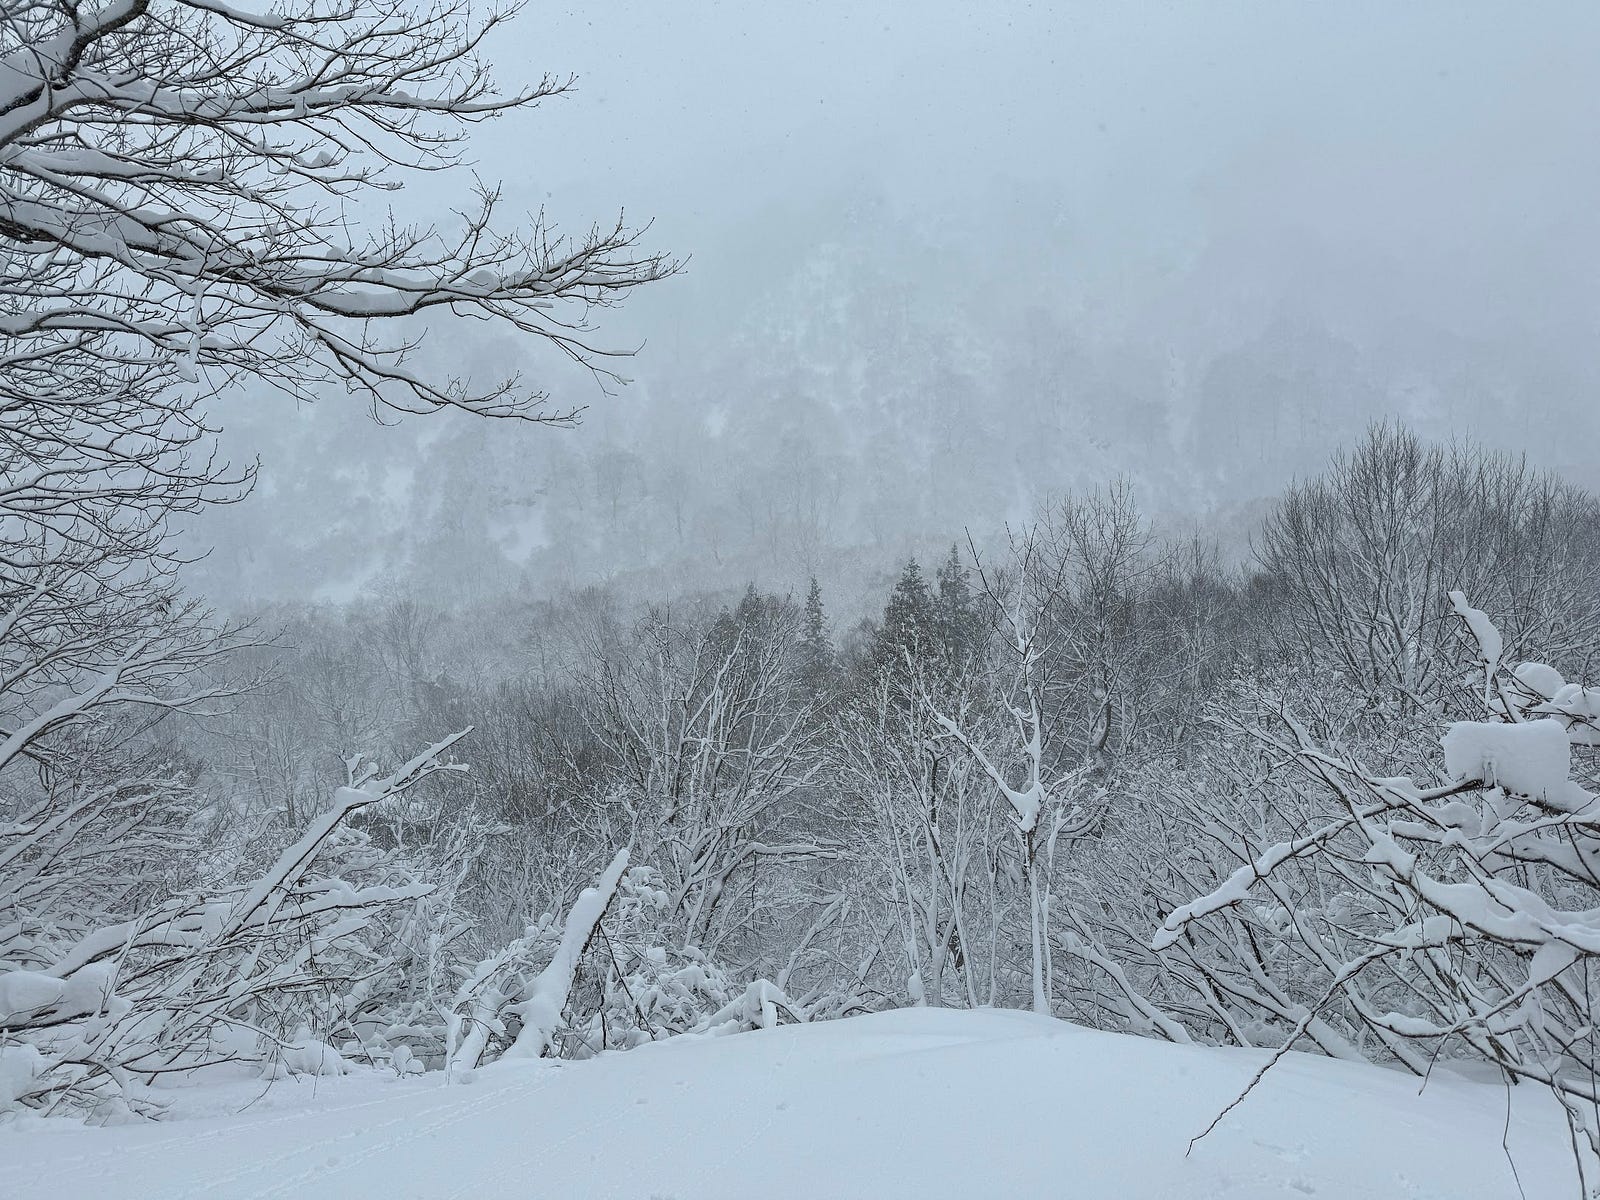 A foggy mountain completely inundated with snow in the background near Shirotaro-yama in Yamagata Prefecture.